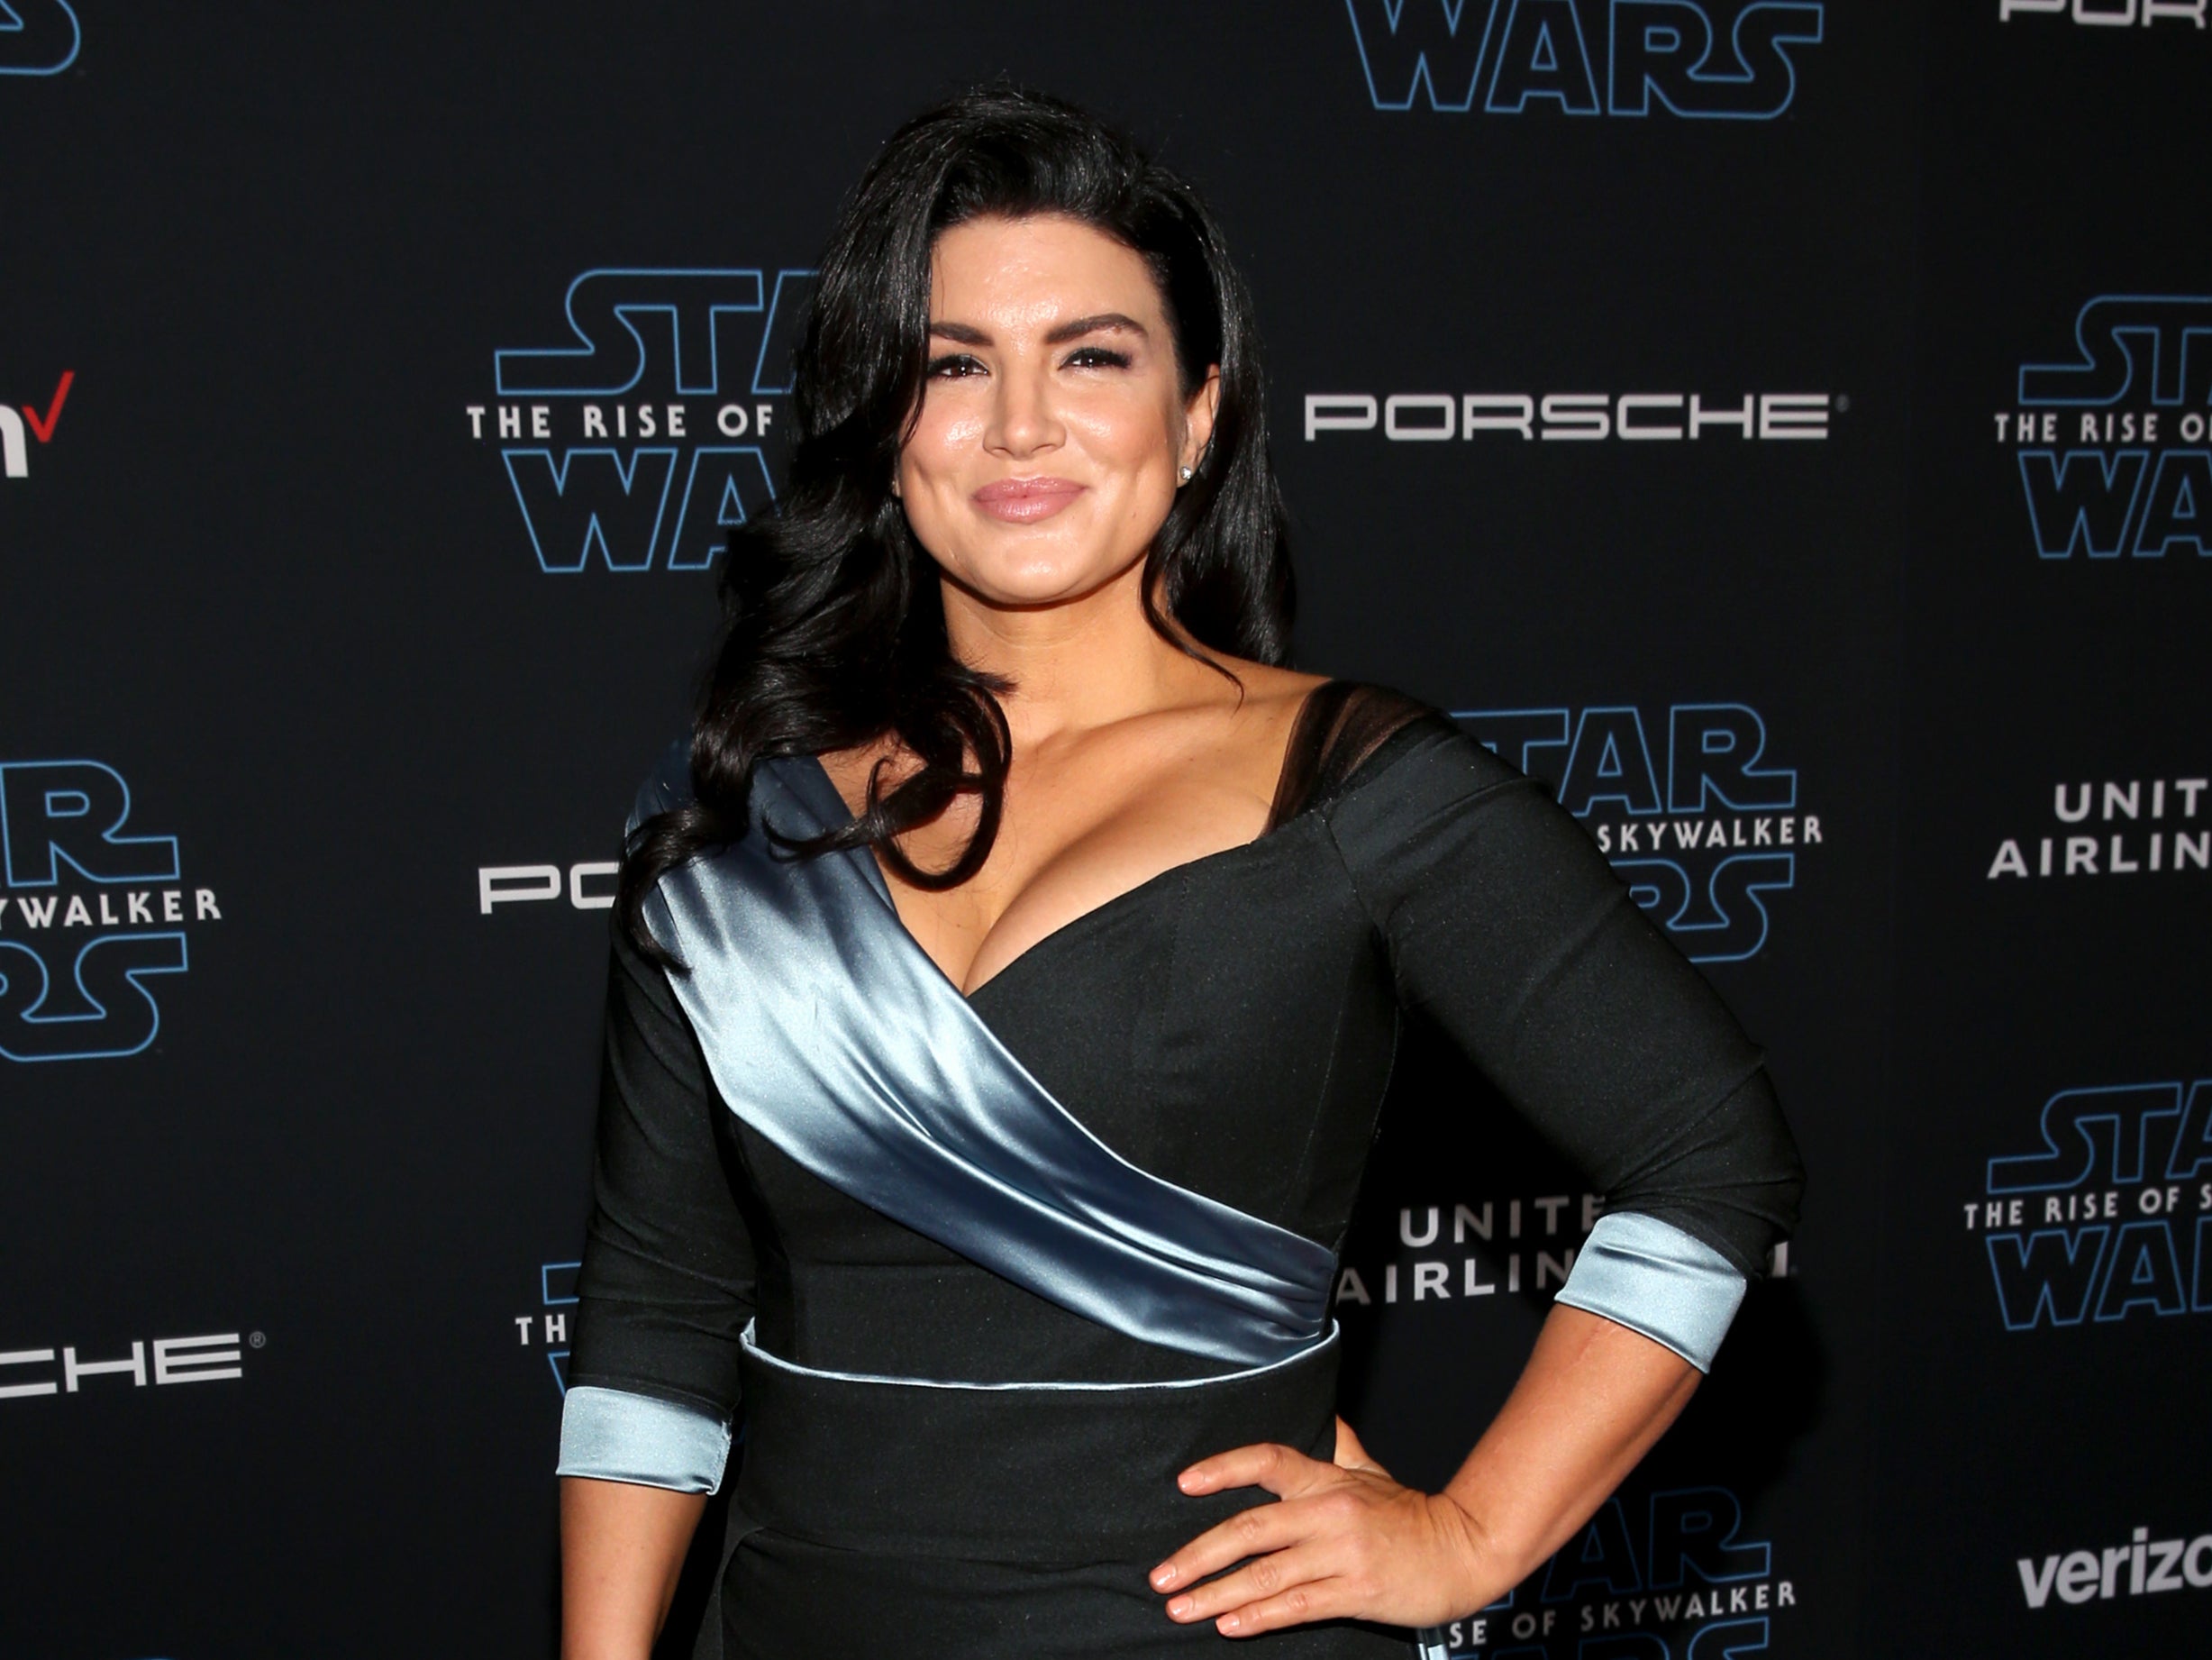 Gina Carano at the premiere of Star Wars: The Rise of Skywalker on 16 December 2019 in Hollywood, California